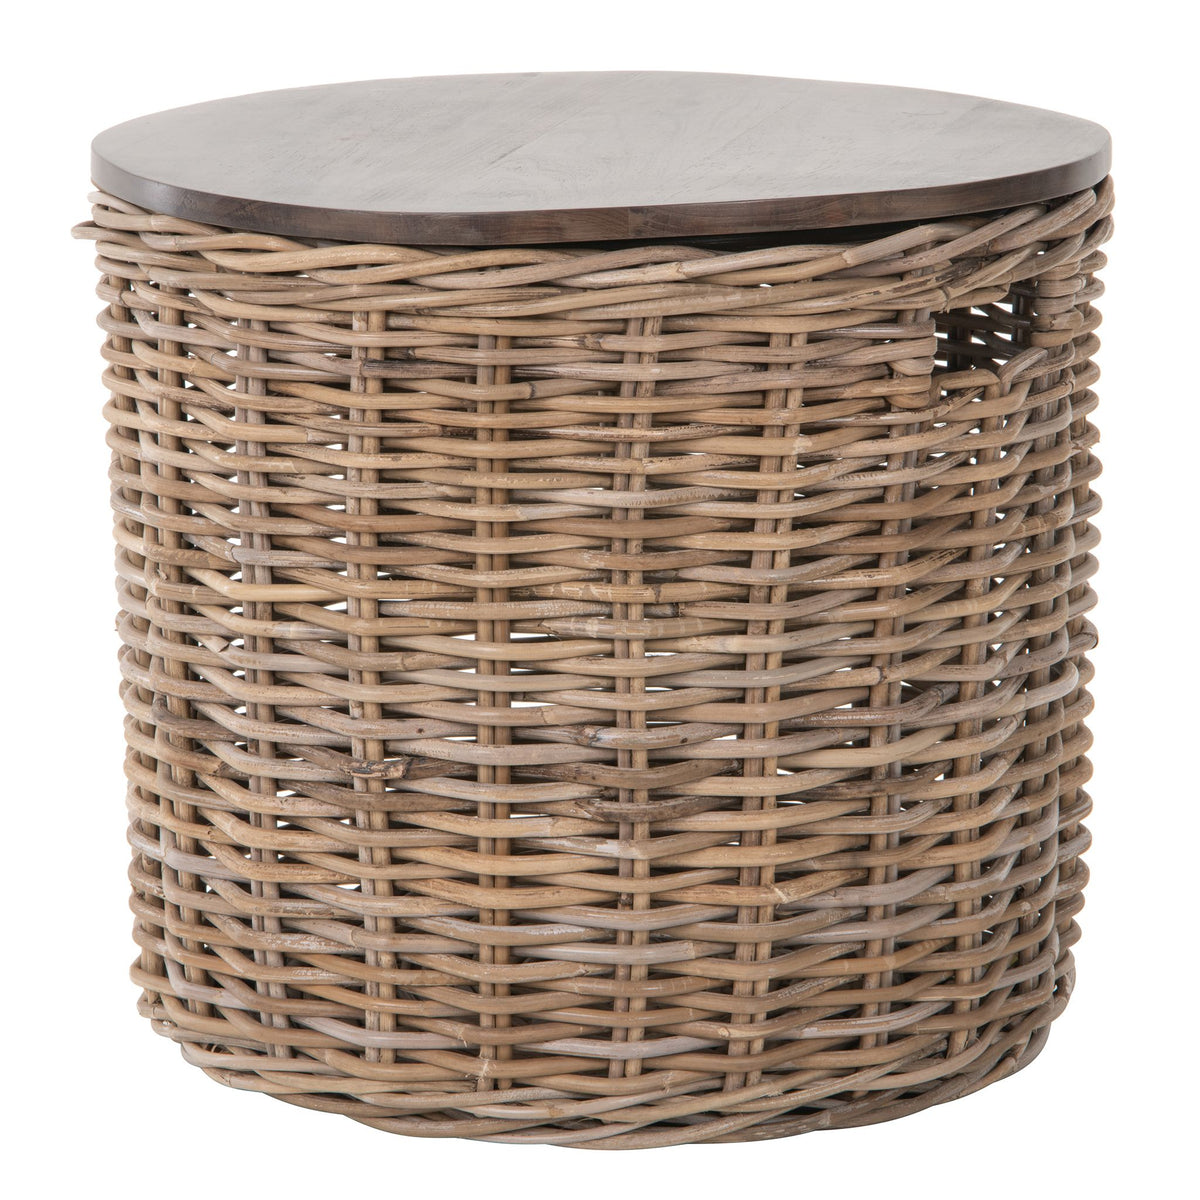 Kouboo Round Rattan Storage Basket with Wood Lid - Side or End Table with Hidden Storage